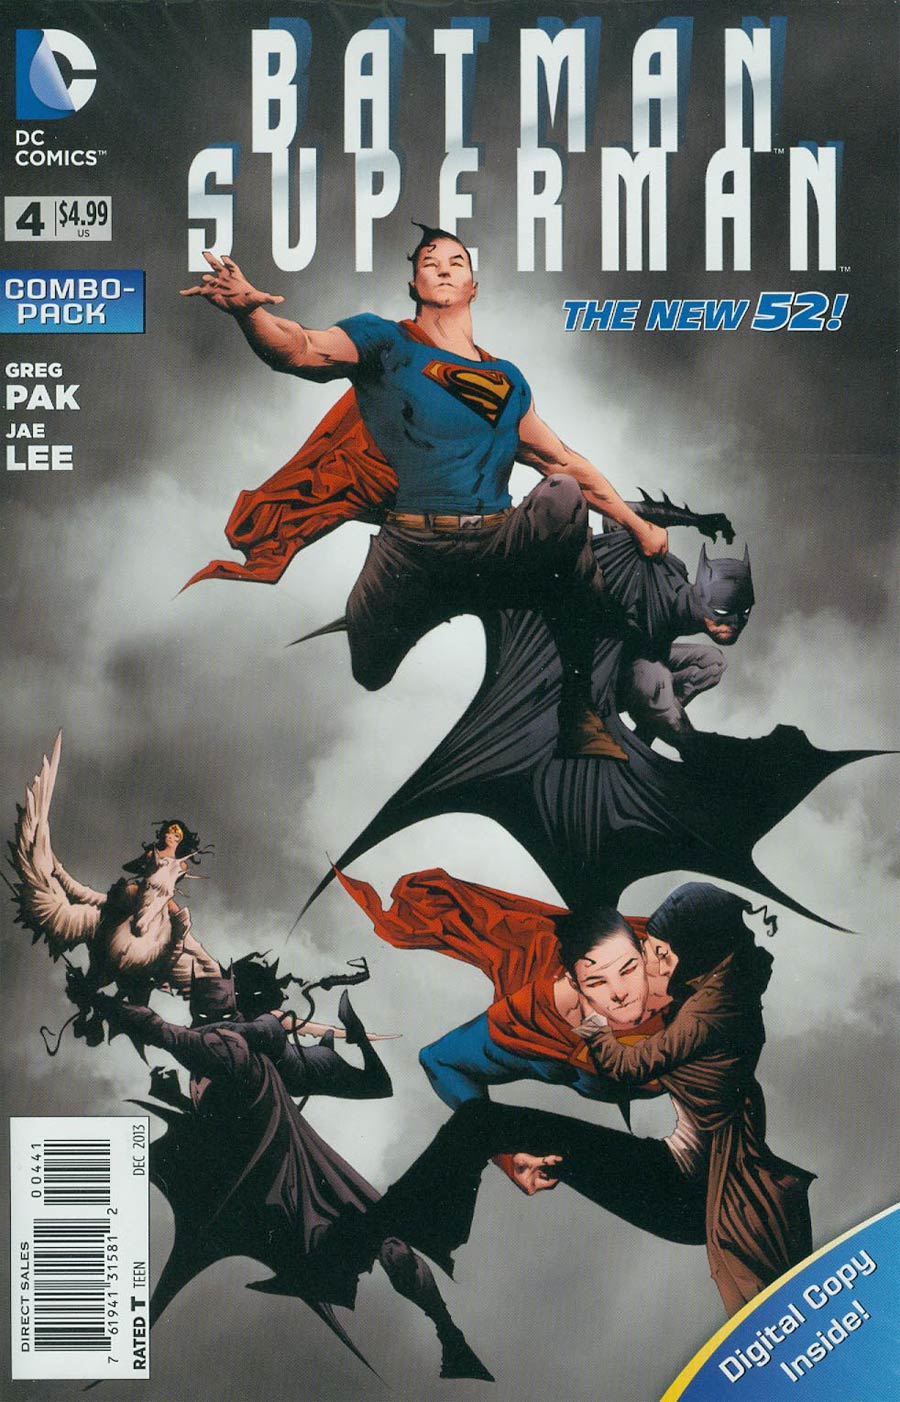 Batman Superman #4 Cover C Combo Pack Without Polybag